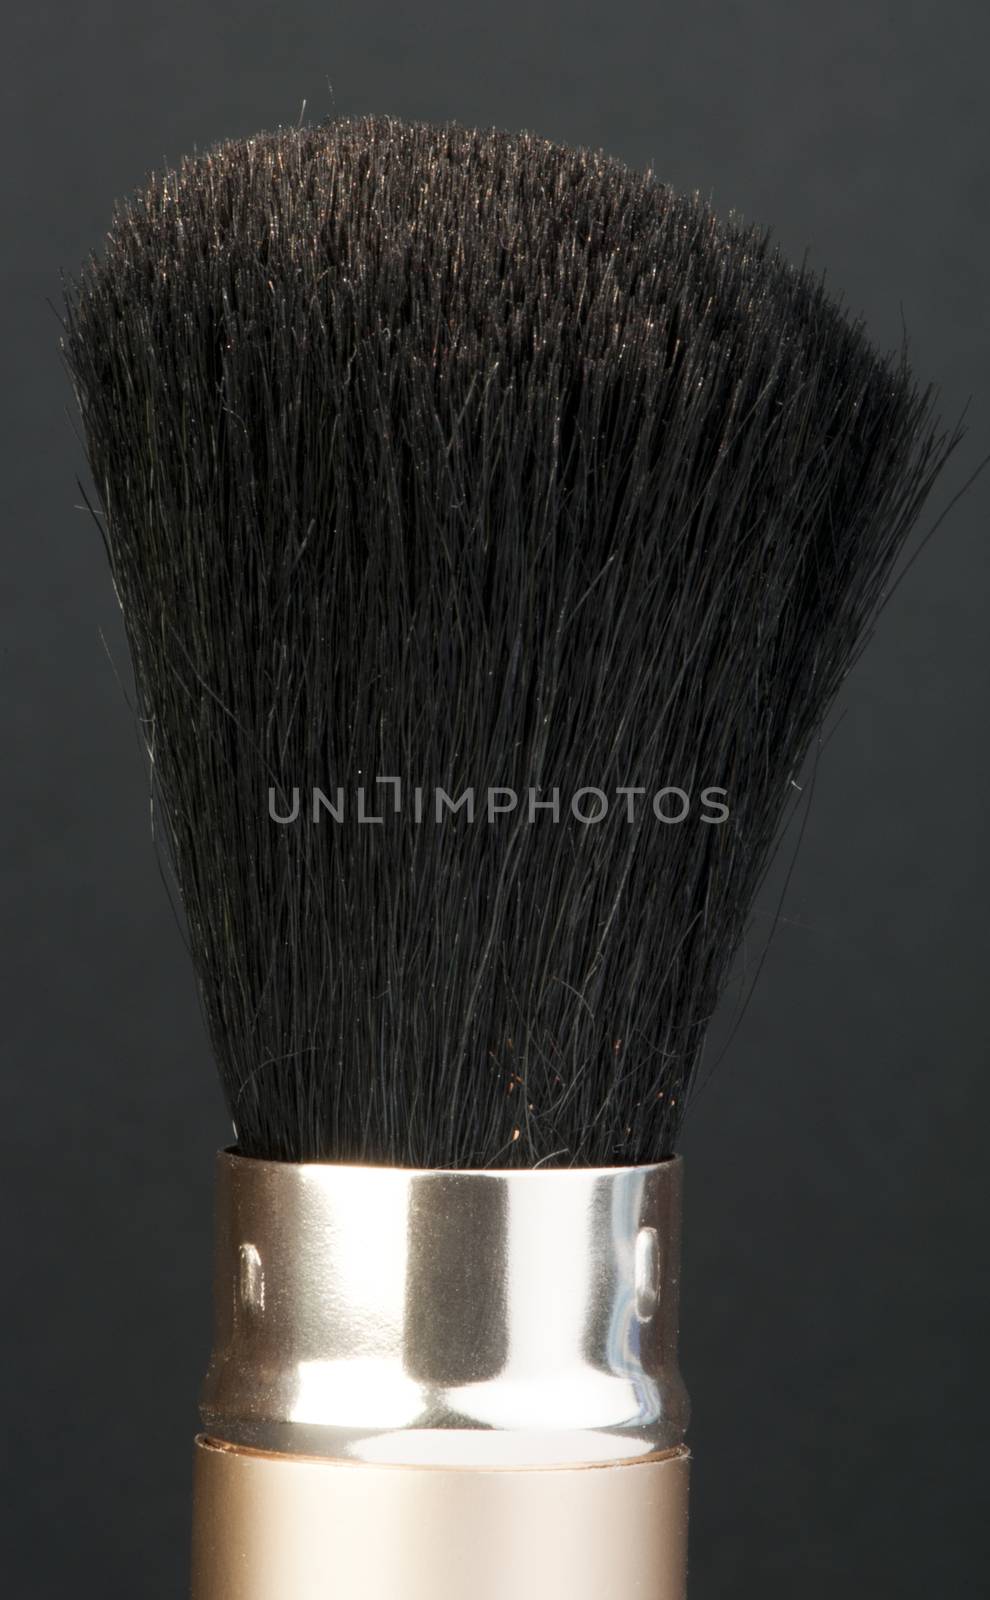 Brushes for makeup. Black isolated brush